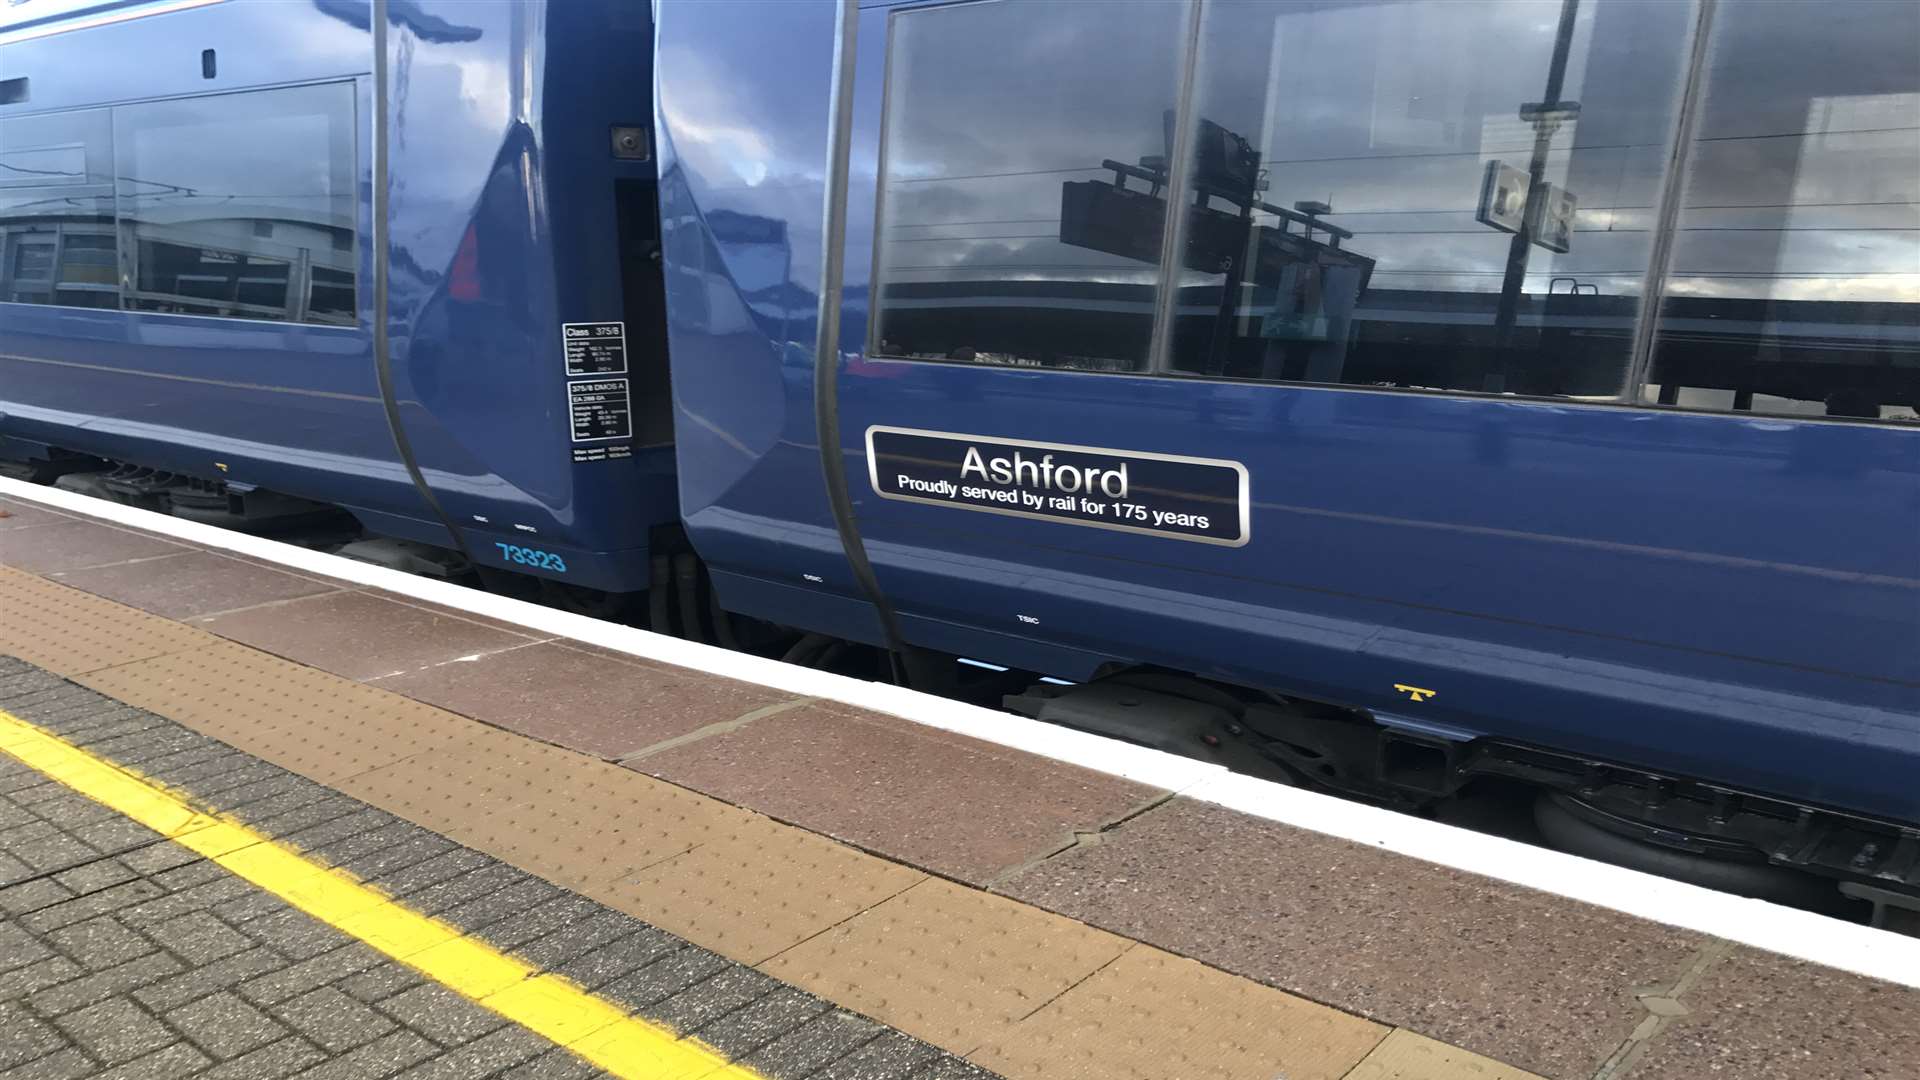 The new name reads 'Ashford, Proudly served by rail for 175 years'.